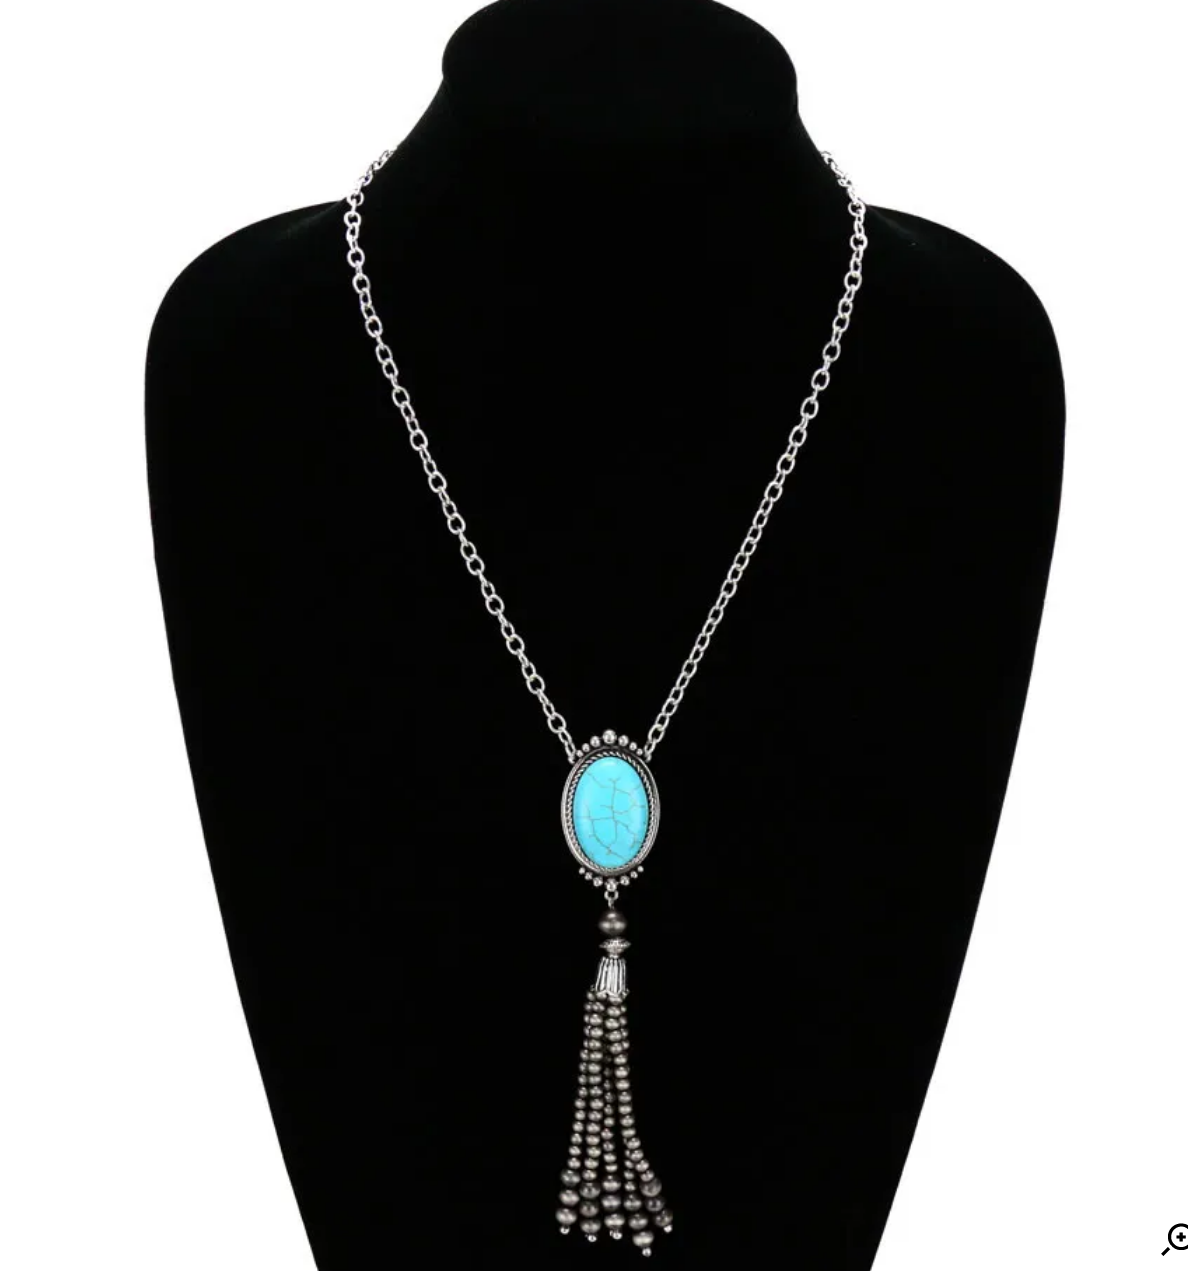 Oval Stone with Navajo Bead Tassel Necklace